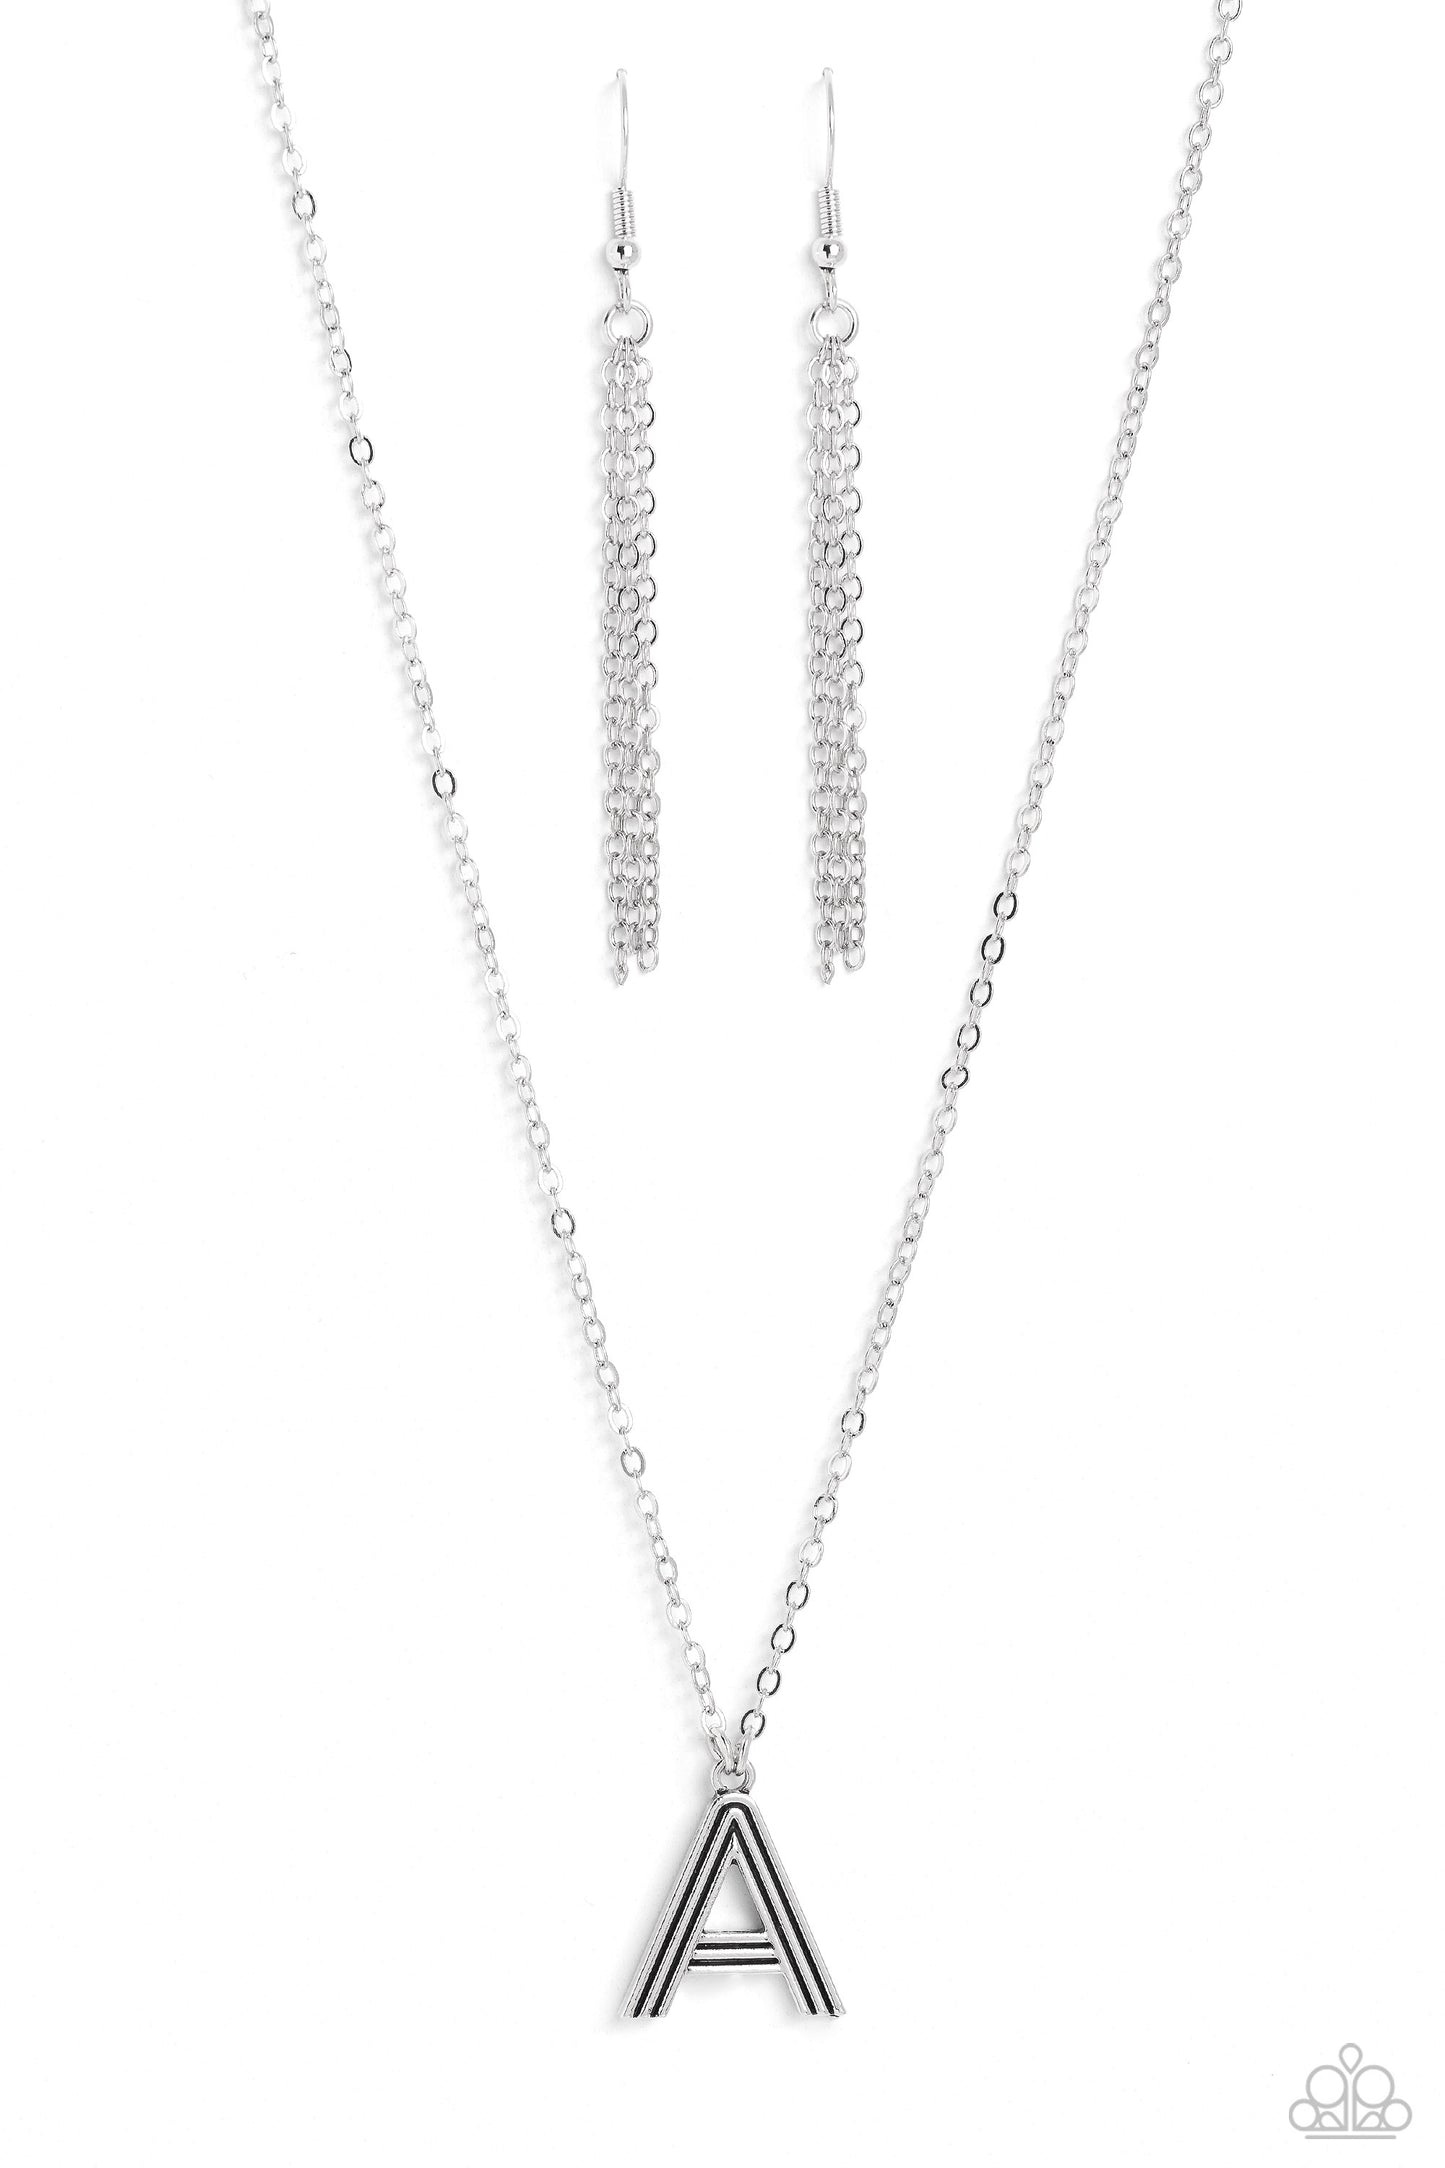 Leave Your Initials Silver - A Necklace - Paparazzi Accessories